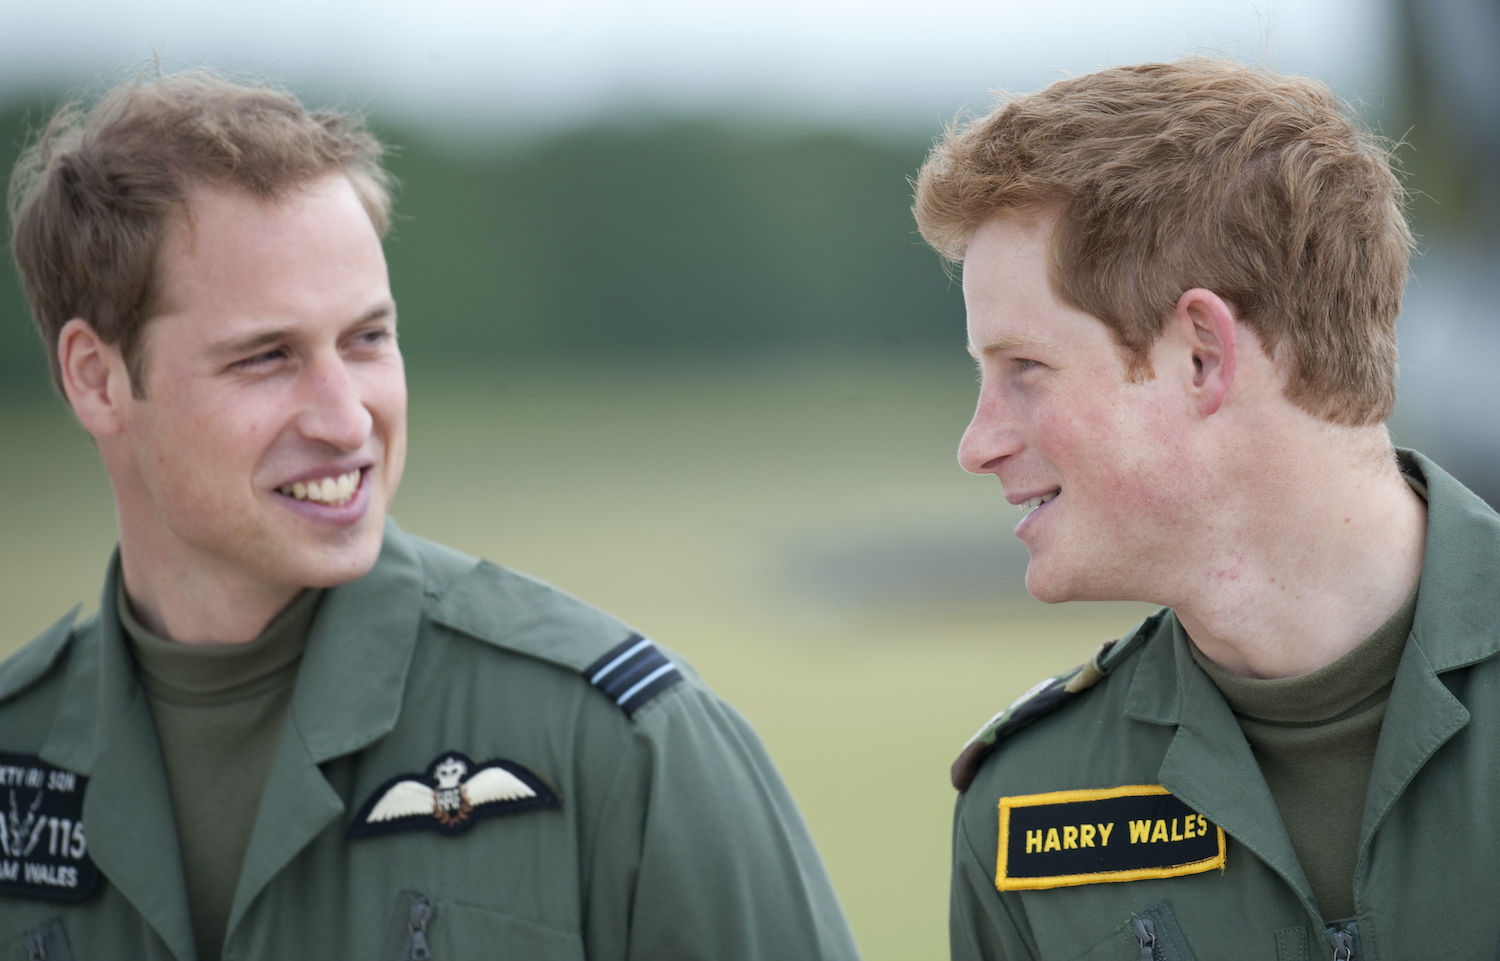 Prince William and Prince Harry showed sibling rivalry and start of breakdown in 2009 interview, expert says